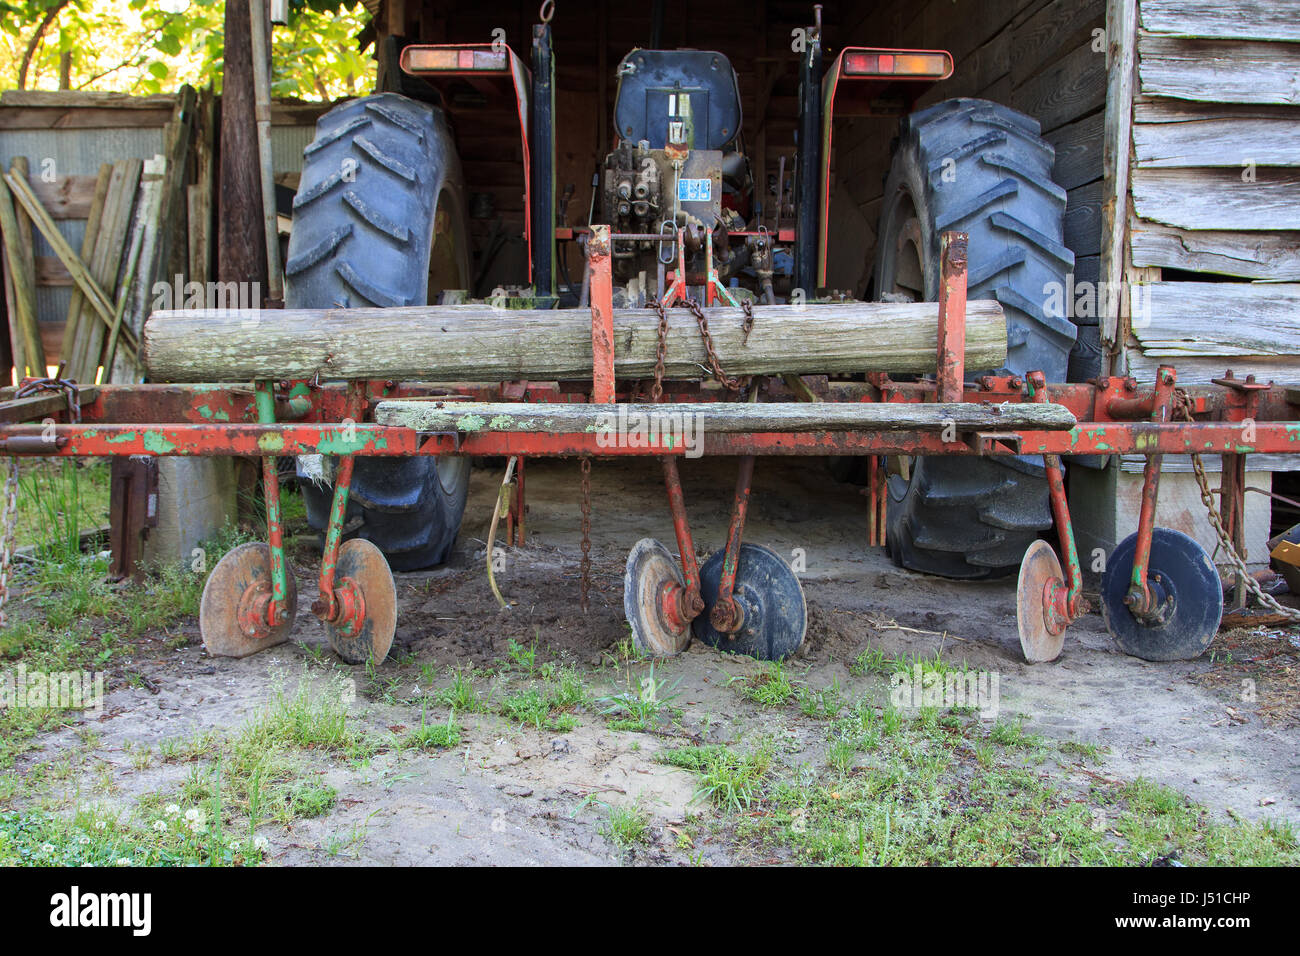 Tractor with disk harrow plow in dilapidated barn Stock Photo